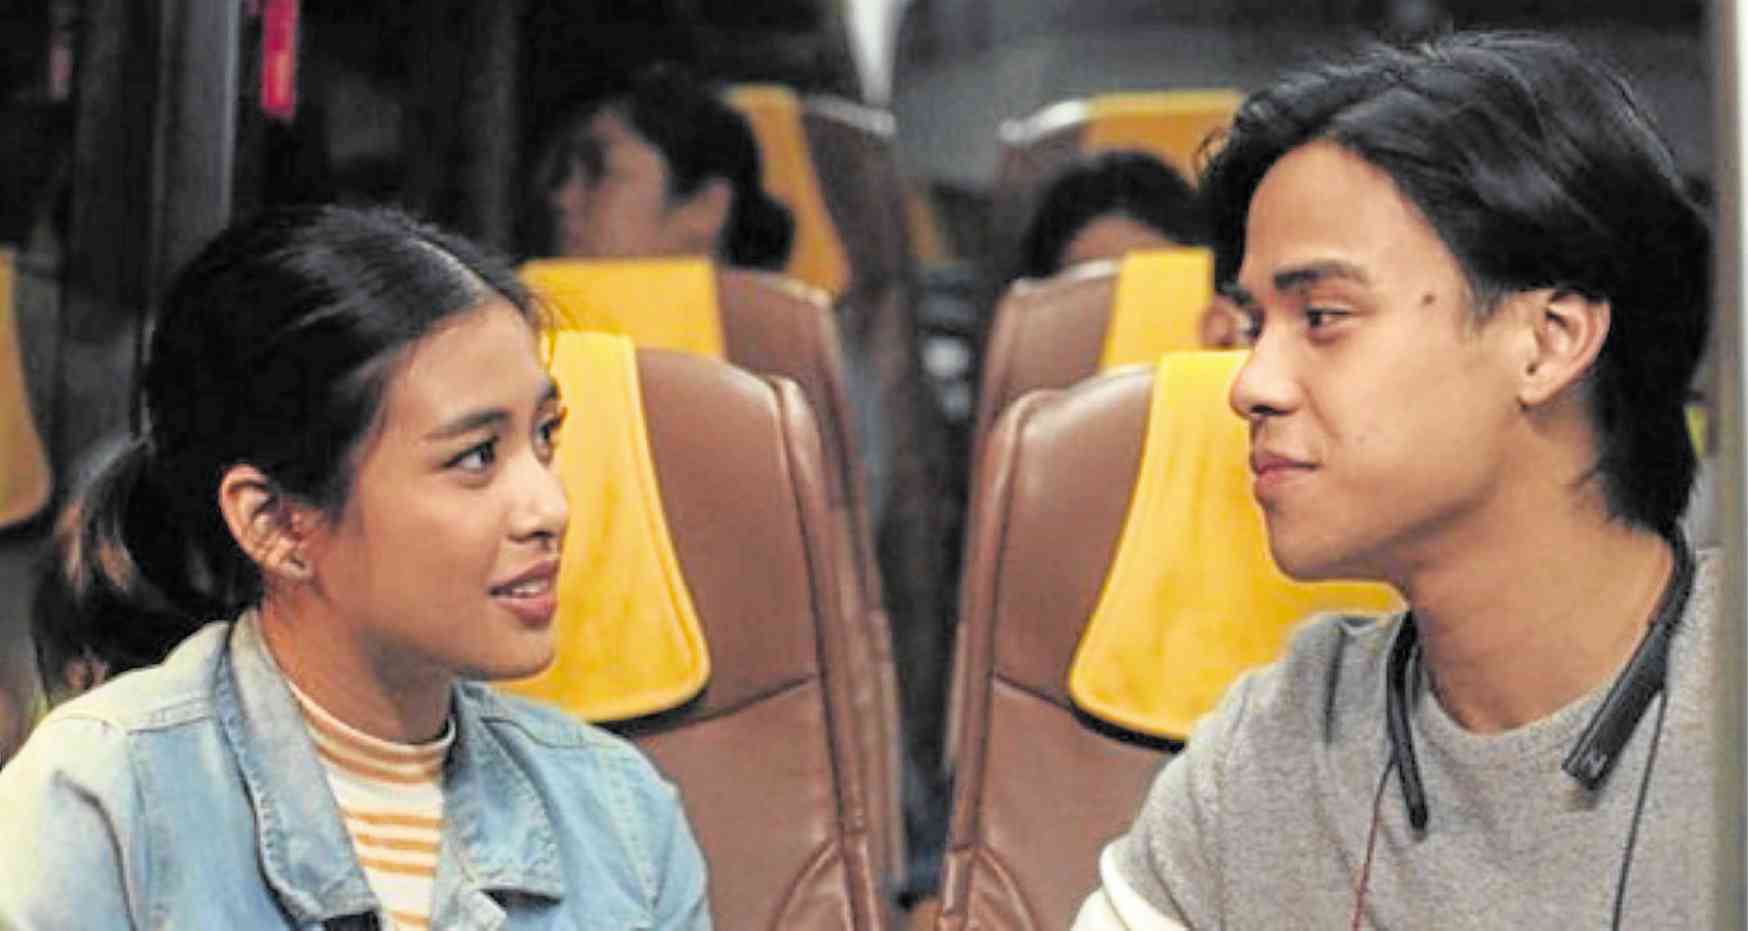 Gabbi Garcia (left) and Khalil Ramos in “LSS (Last Song Syndrome)”